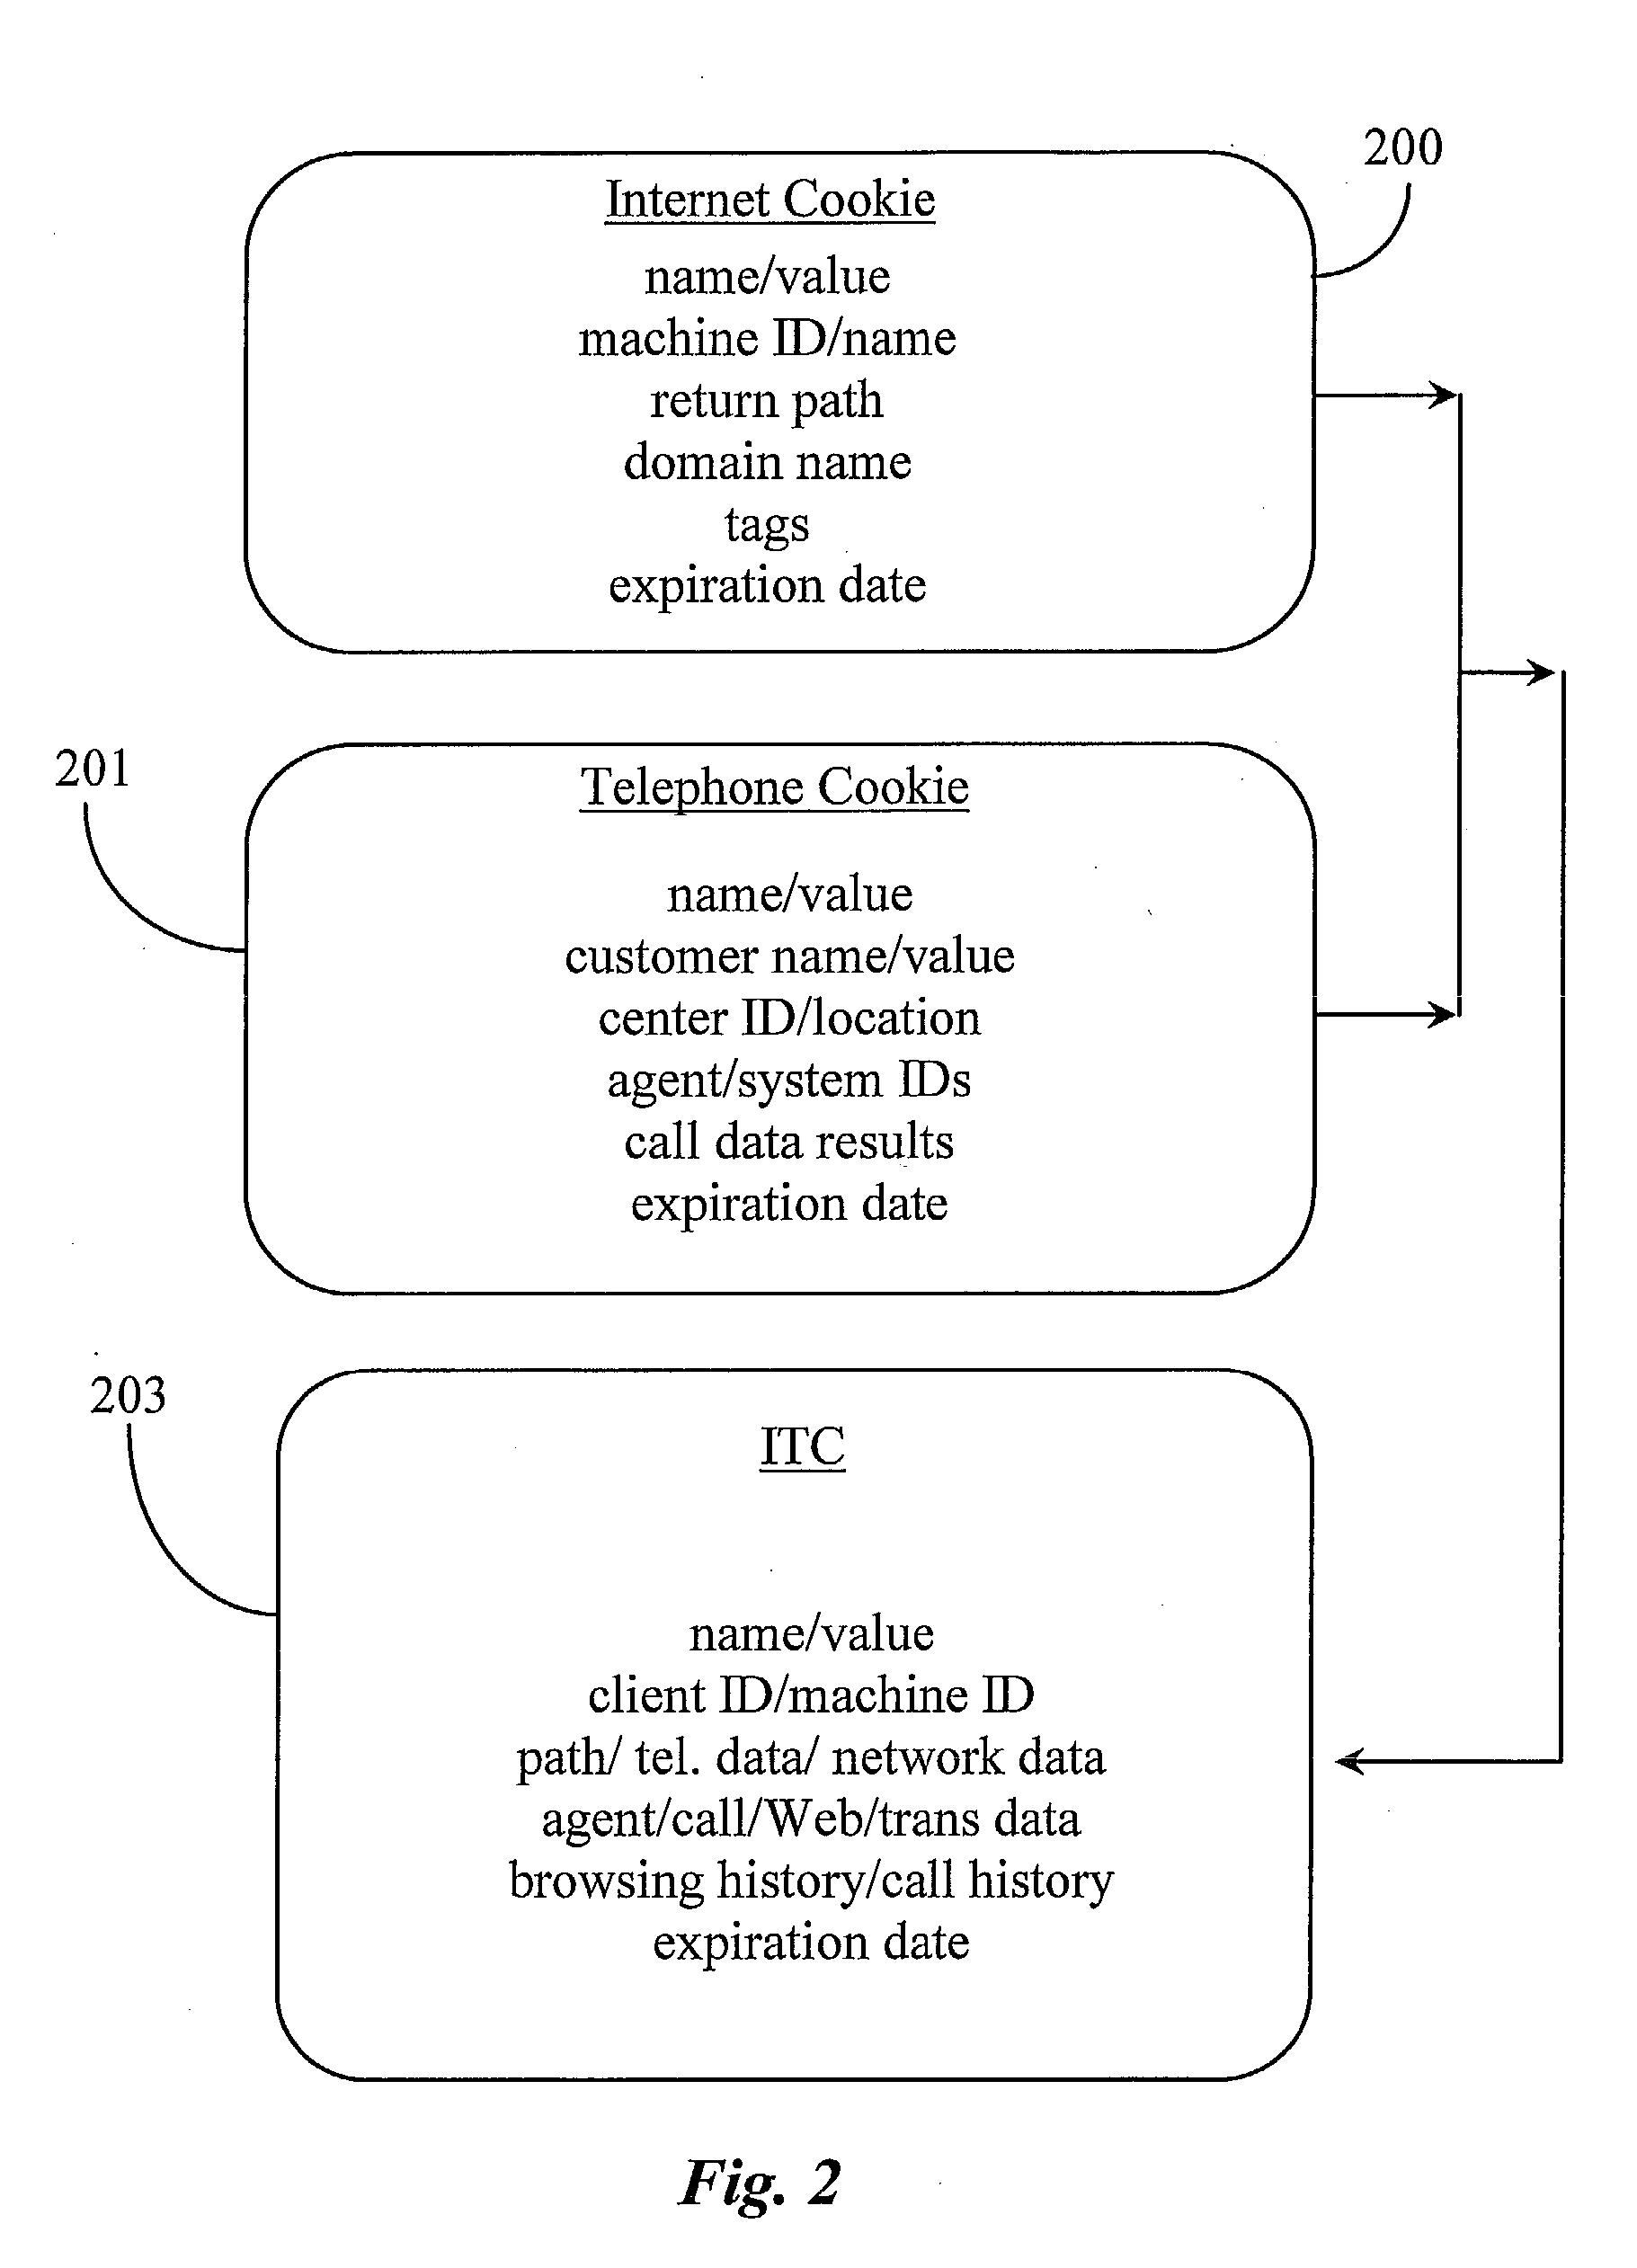 Method for Integrating Client WEB History and Call Center History into a Single Interaction History Accessible in Real Time